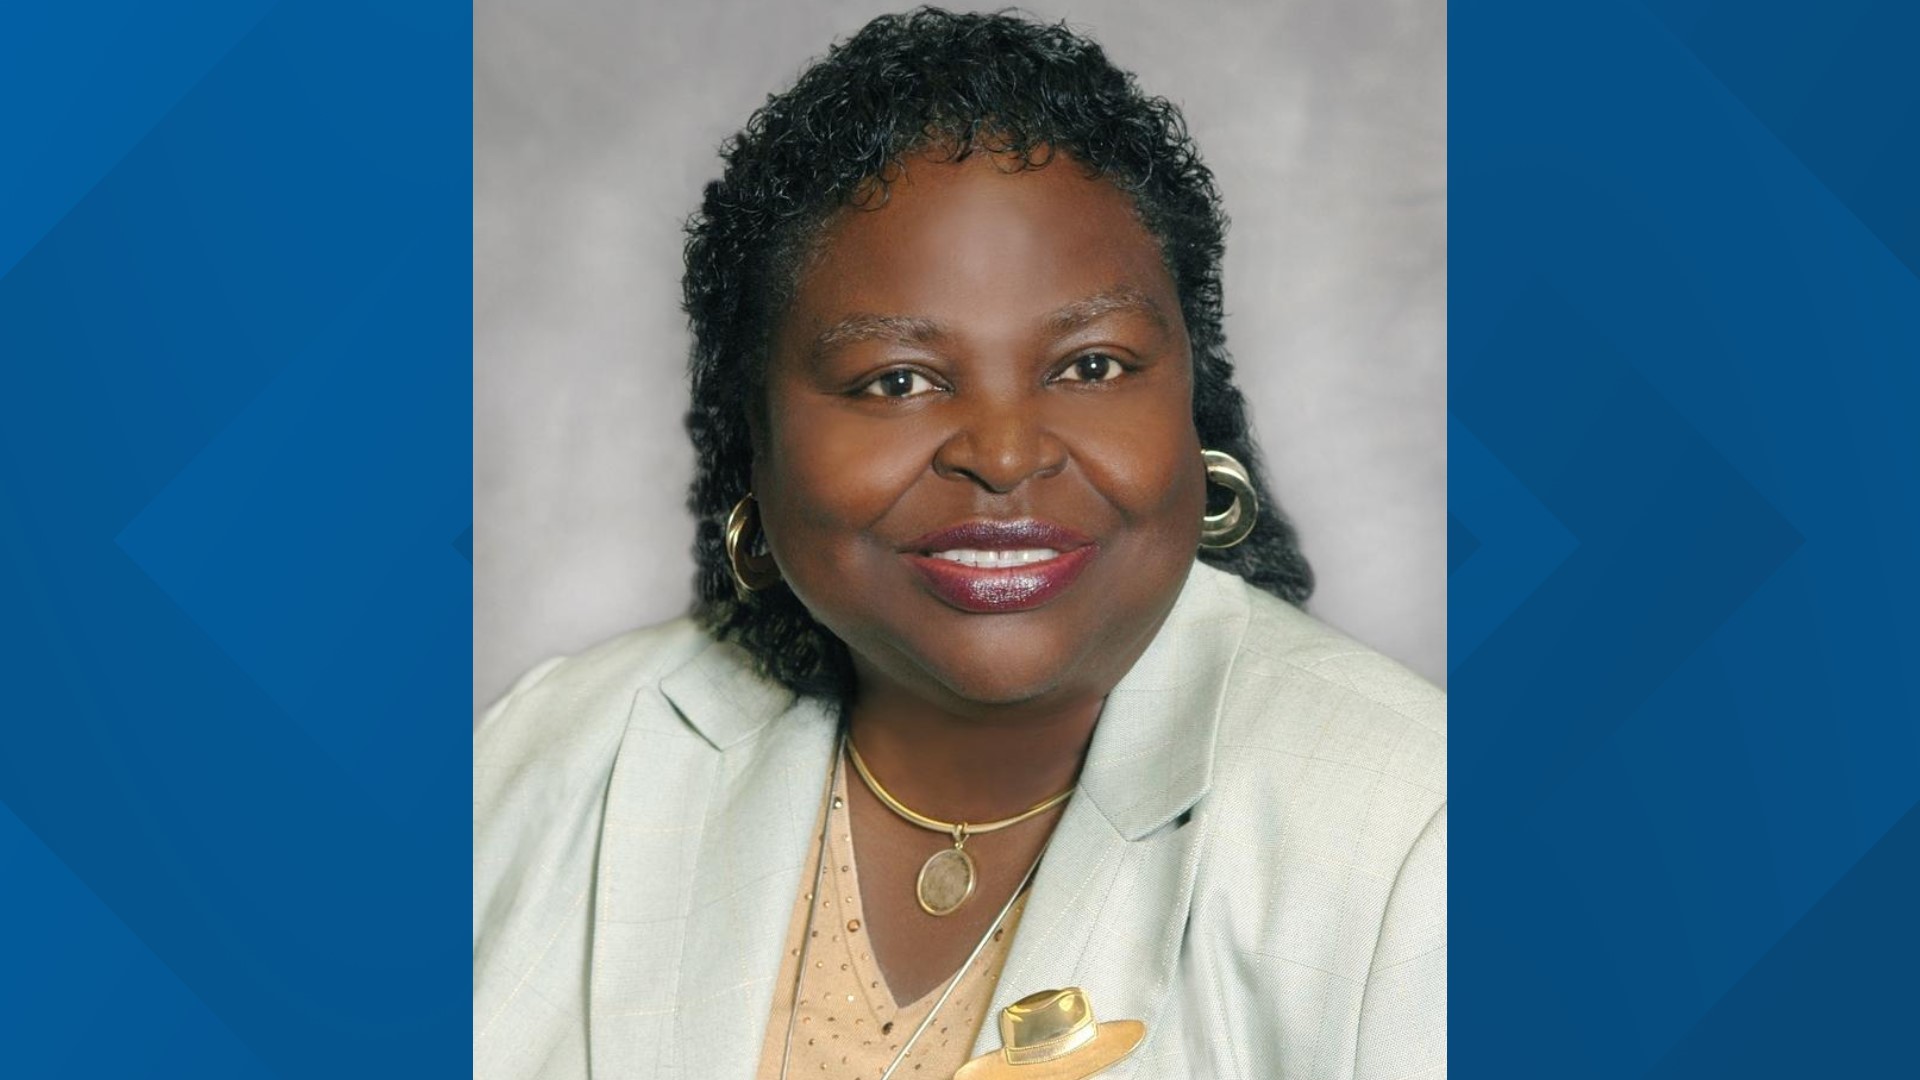 During her time in public service, Brown served as the chairwoman of the Manatee Board of County Commissioners.